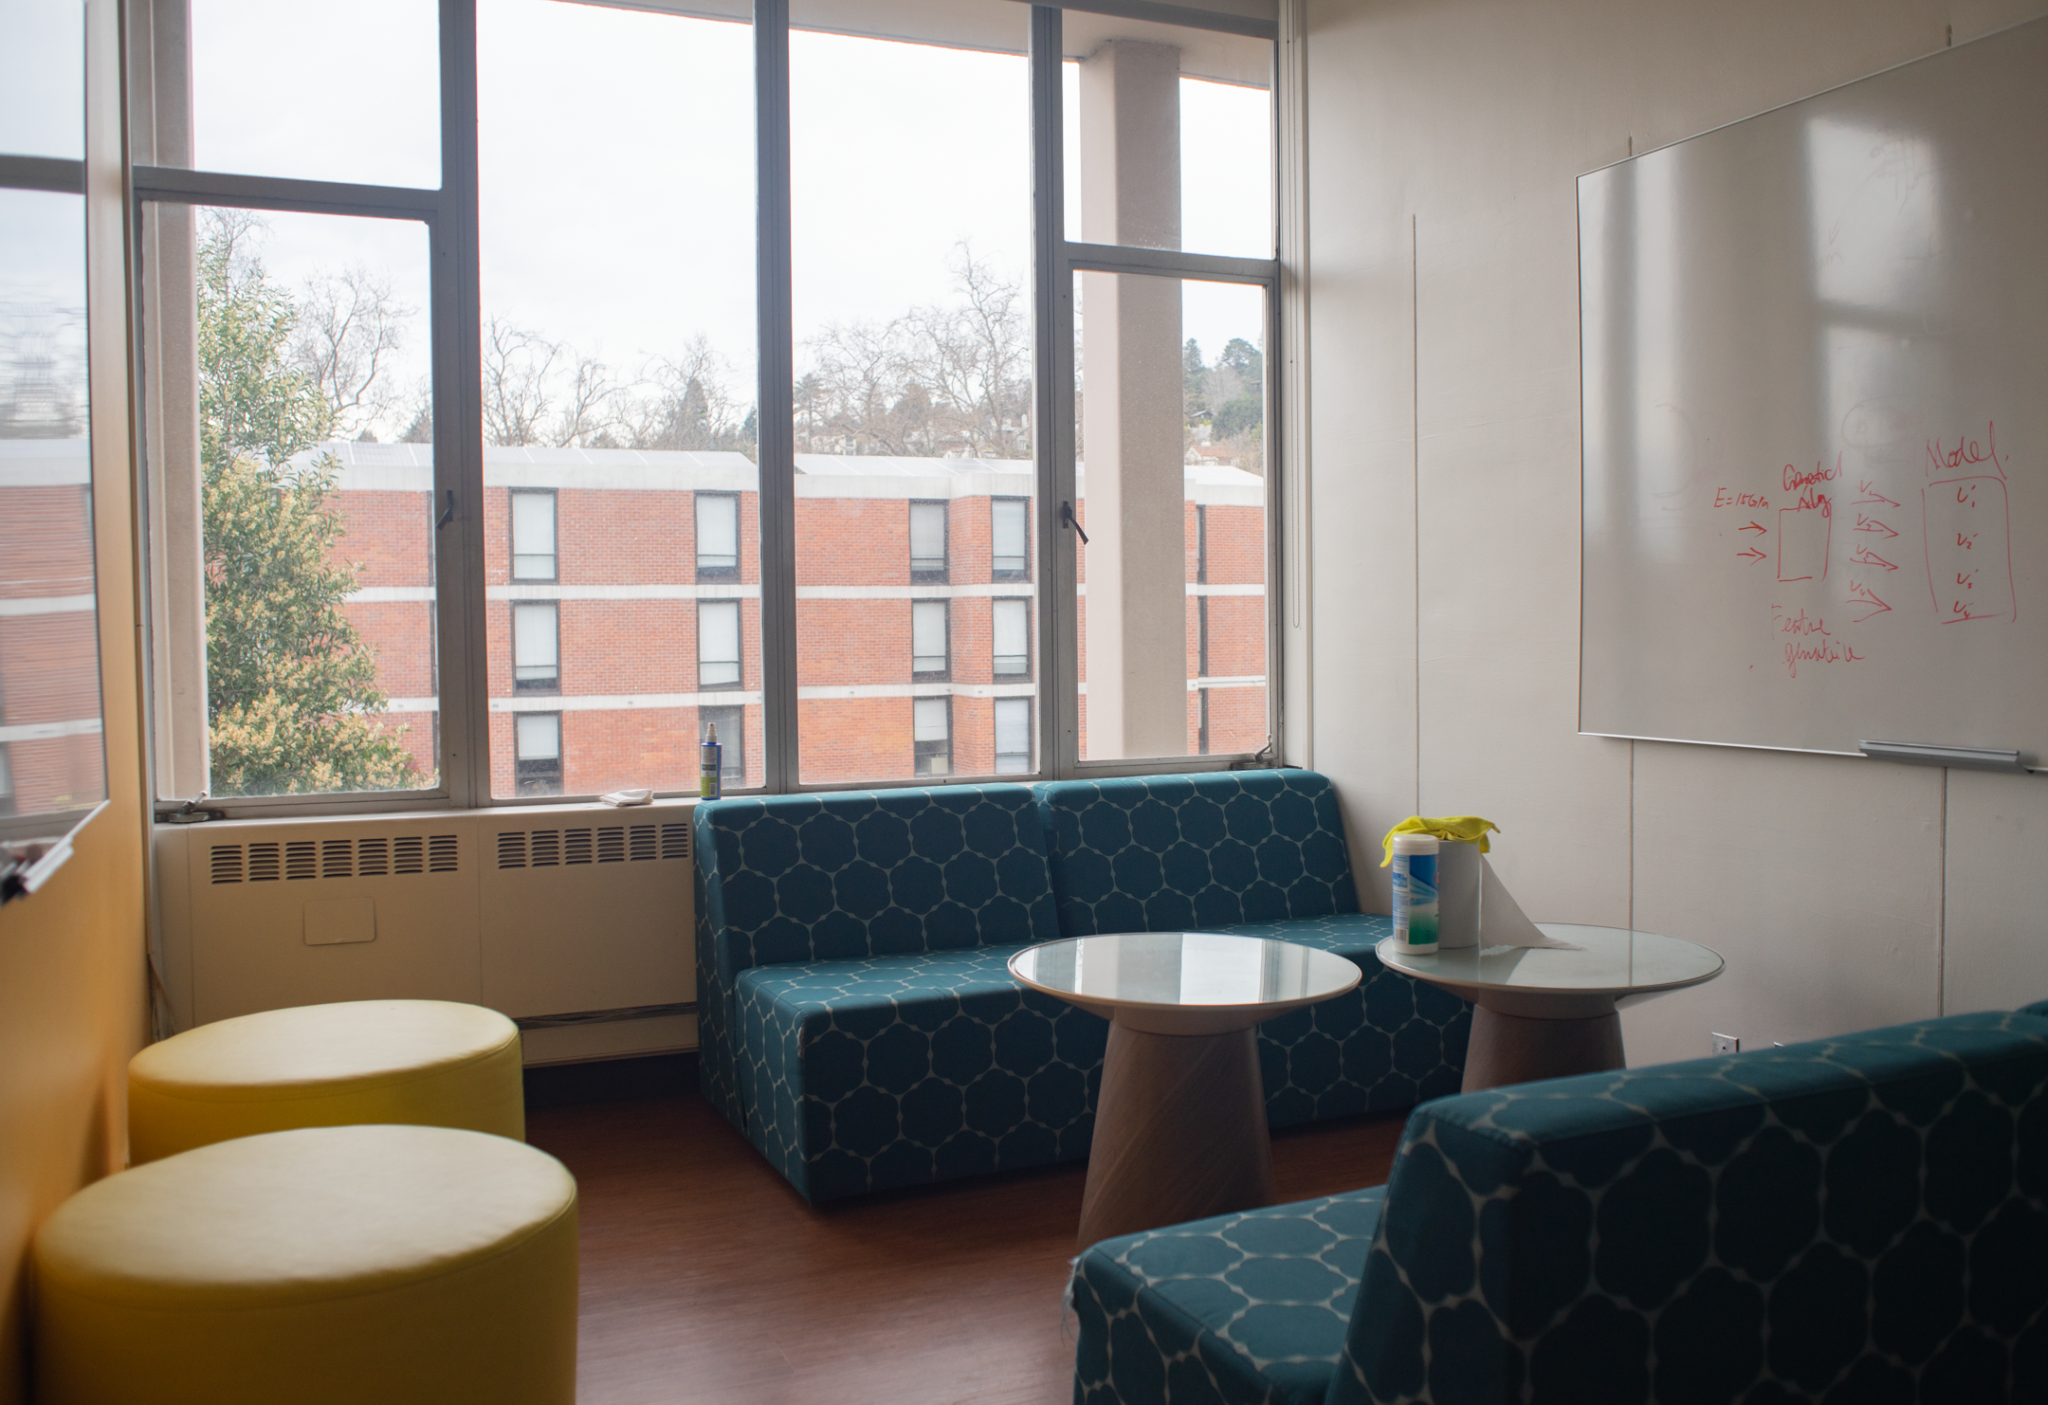 The interior of the student lounge at Shires Hall. It contains couches and whiteboards.